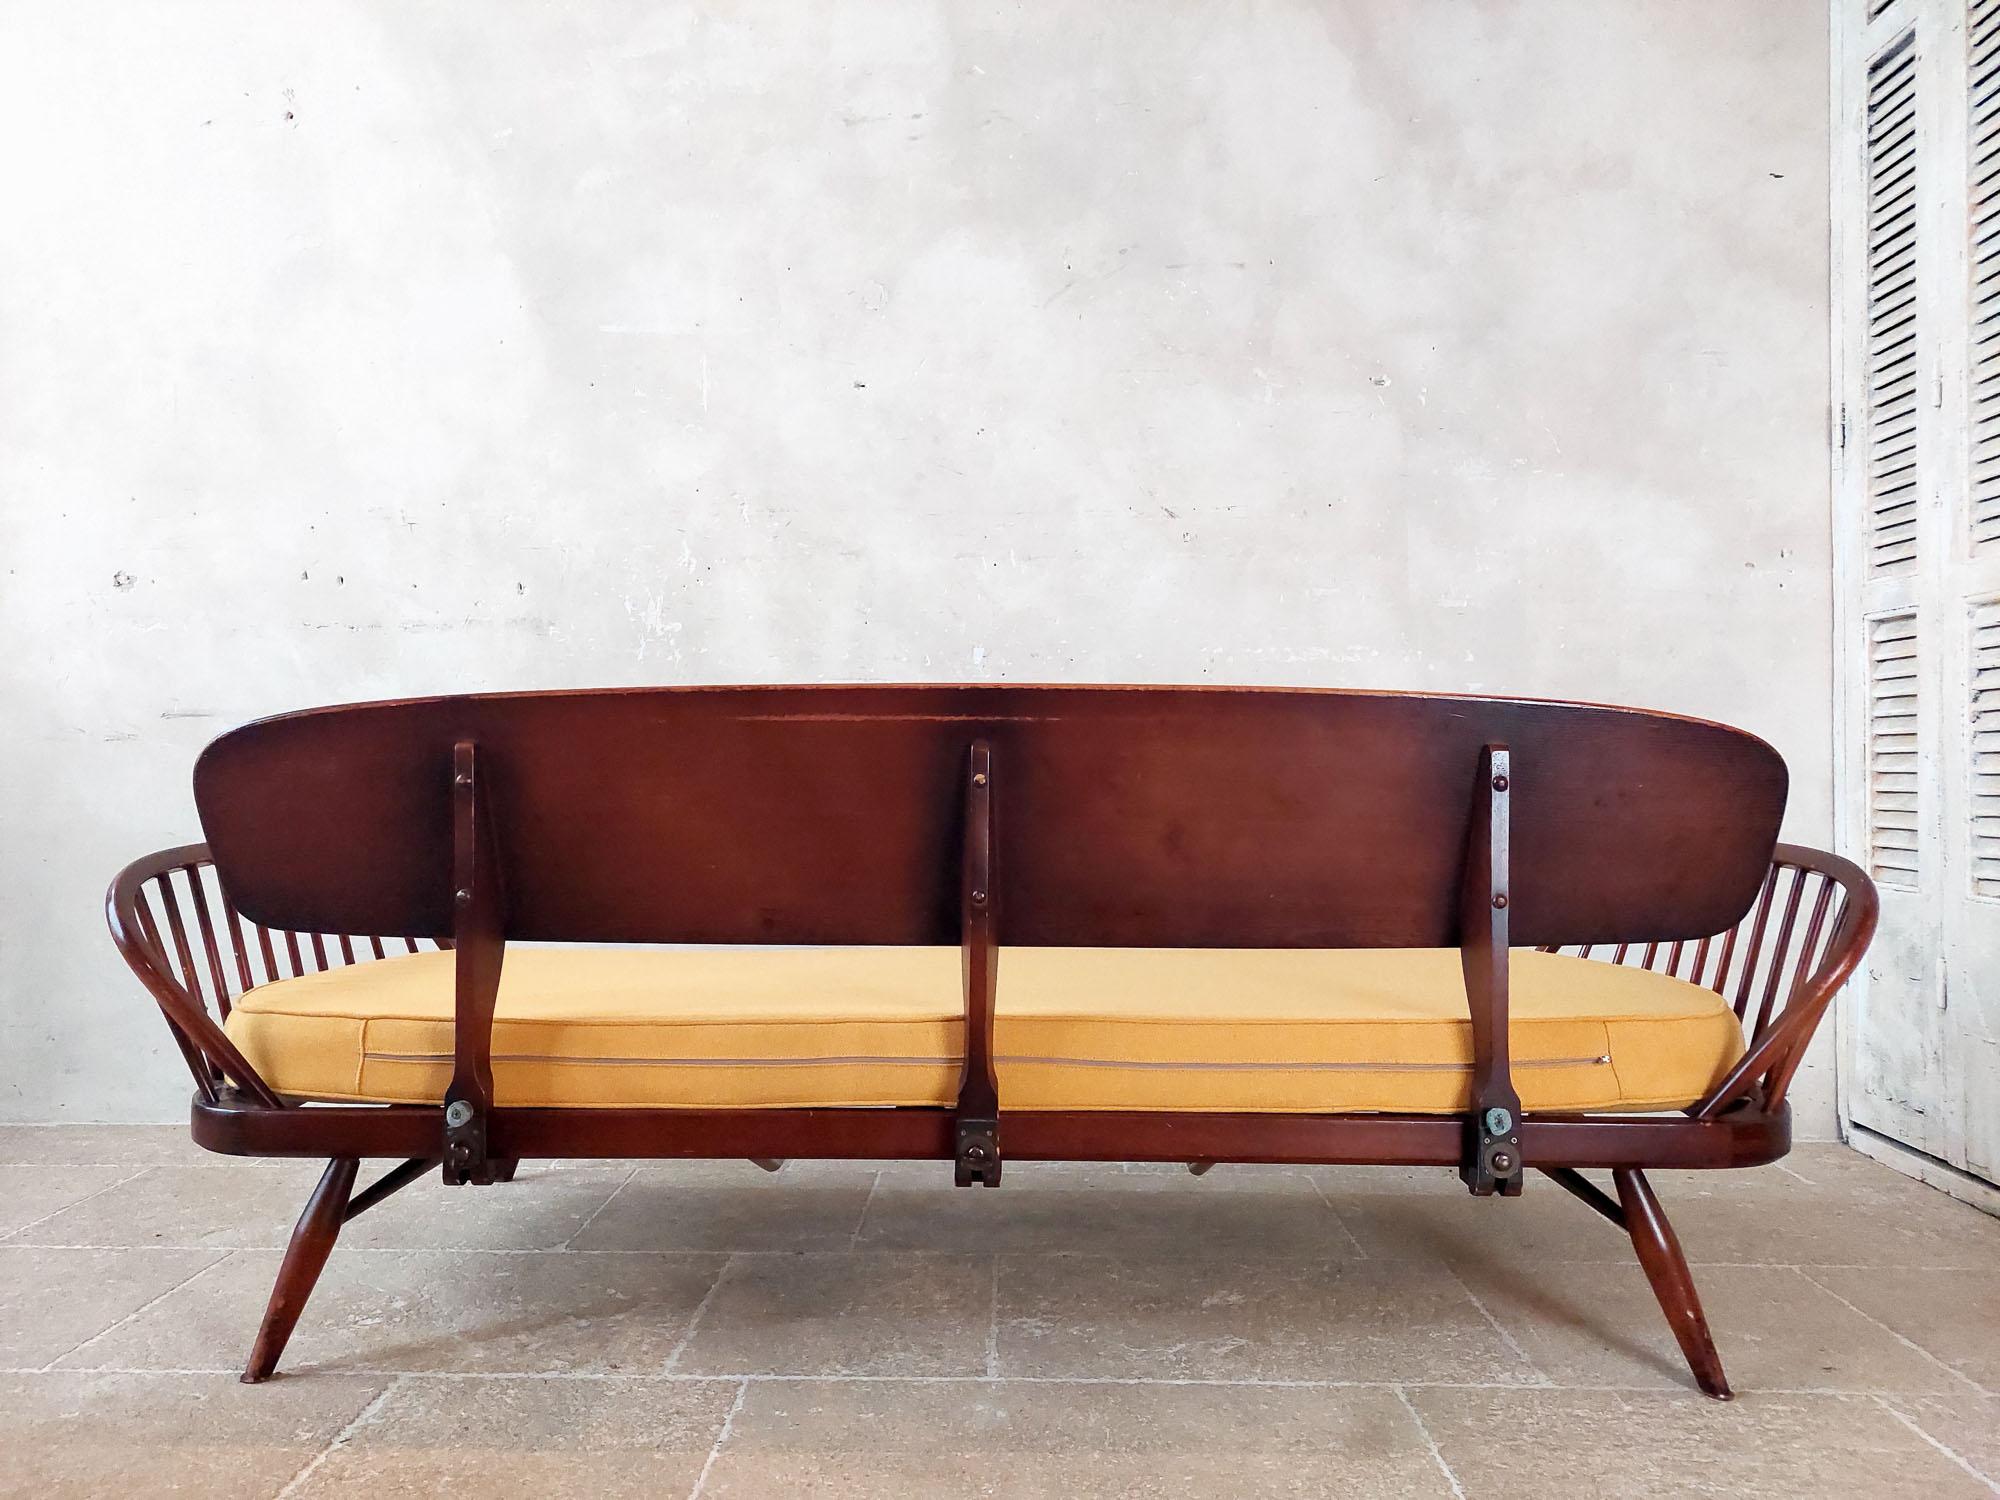 Vintage Ercol daybed studio sofa For Sale 2